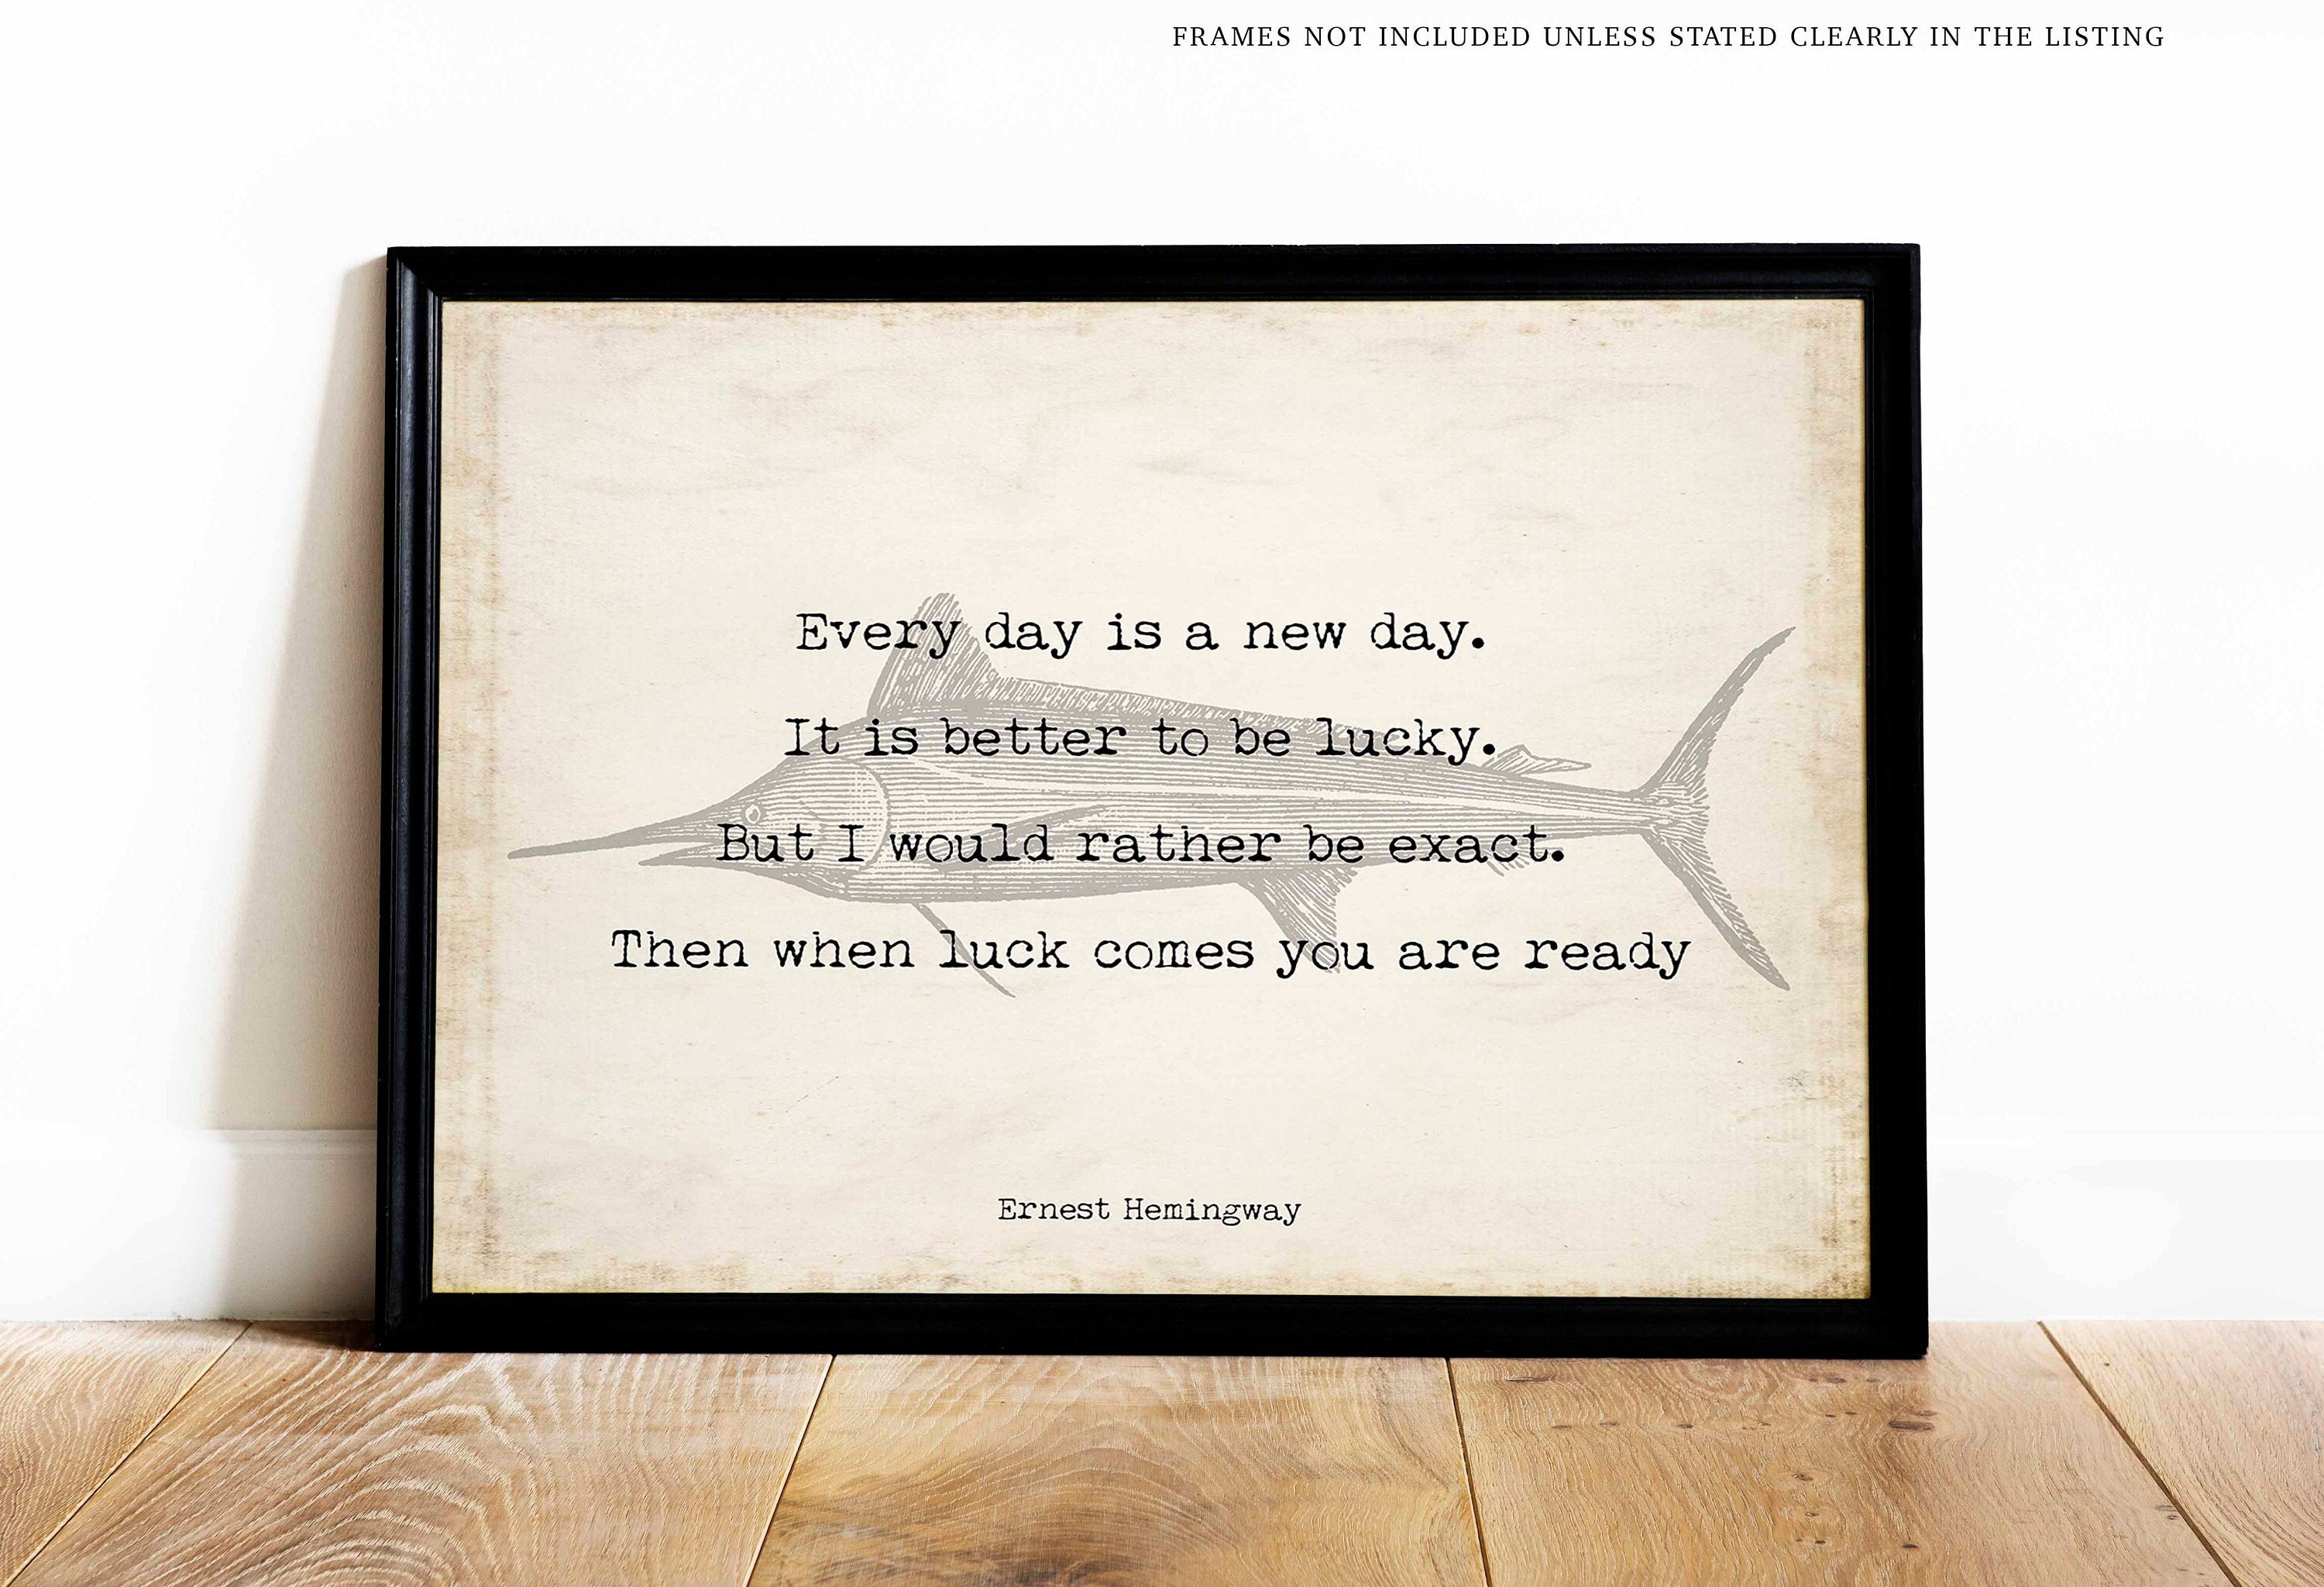 Ernest Hemingway The Old Man and the Sea Quote, Every Day Is A New Day - Inspirational Fishing Quote Print from unframed wall art print